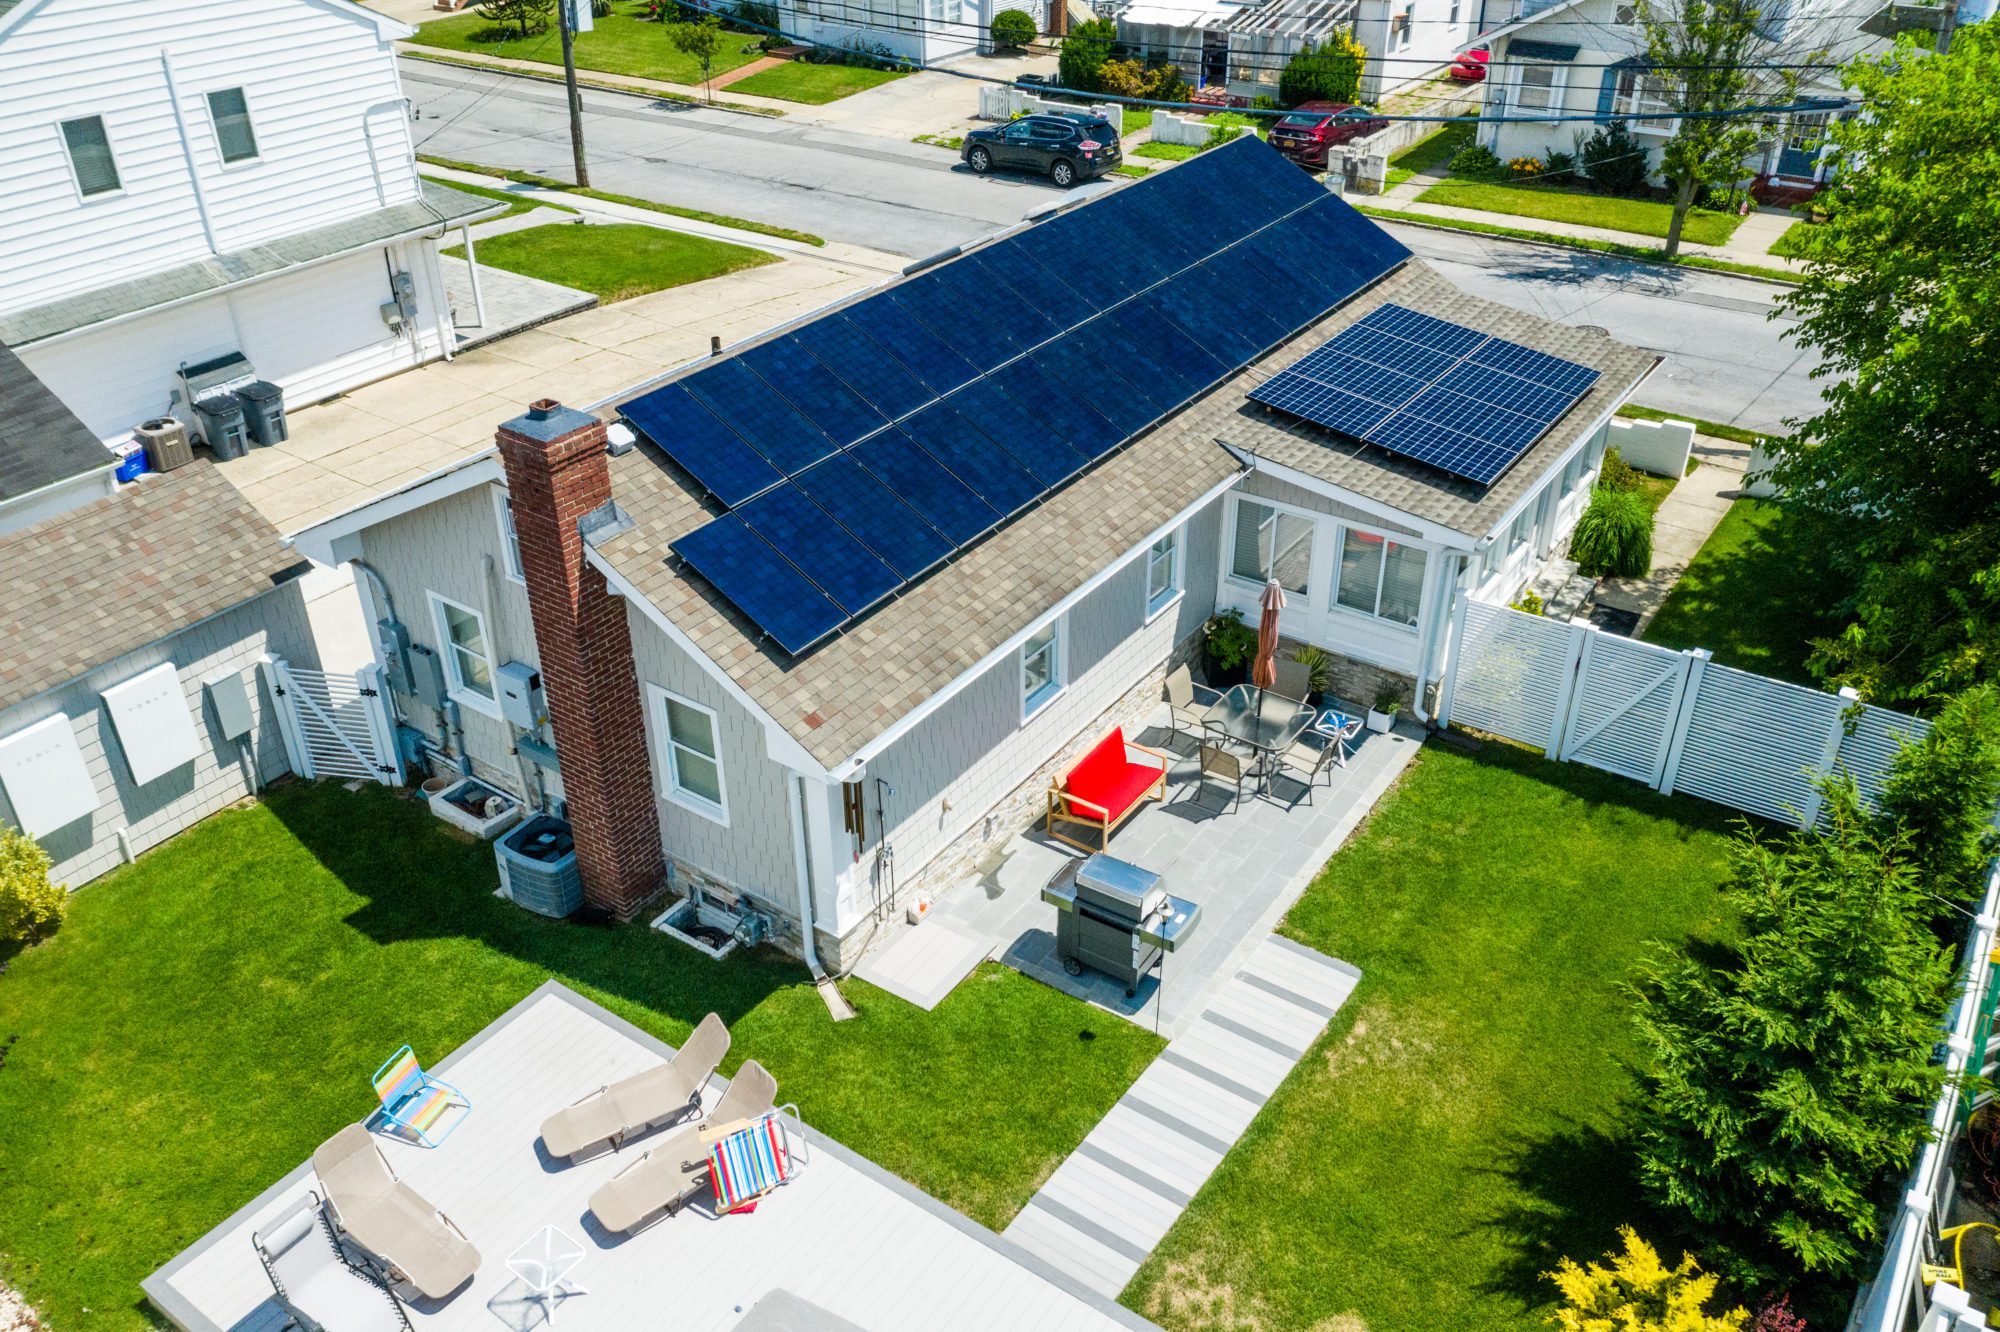 A house on Long Island has solar panels on the roof. Fall is the perfect time to learn more about renewable energy and go back to school with solar.